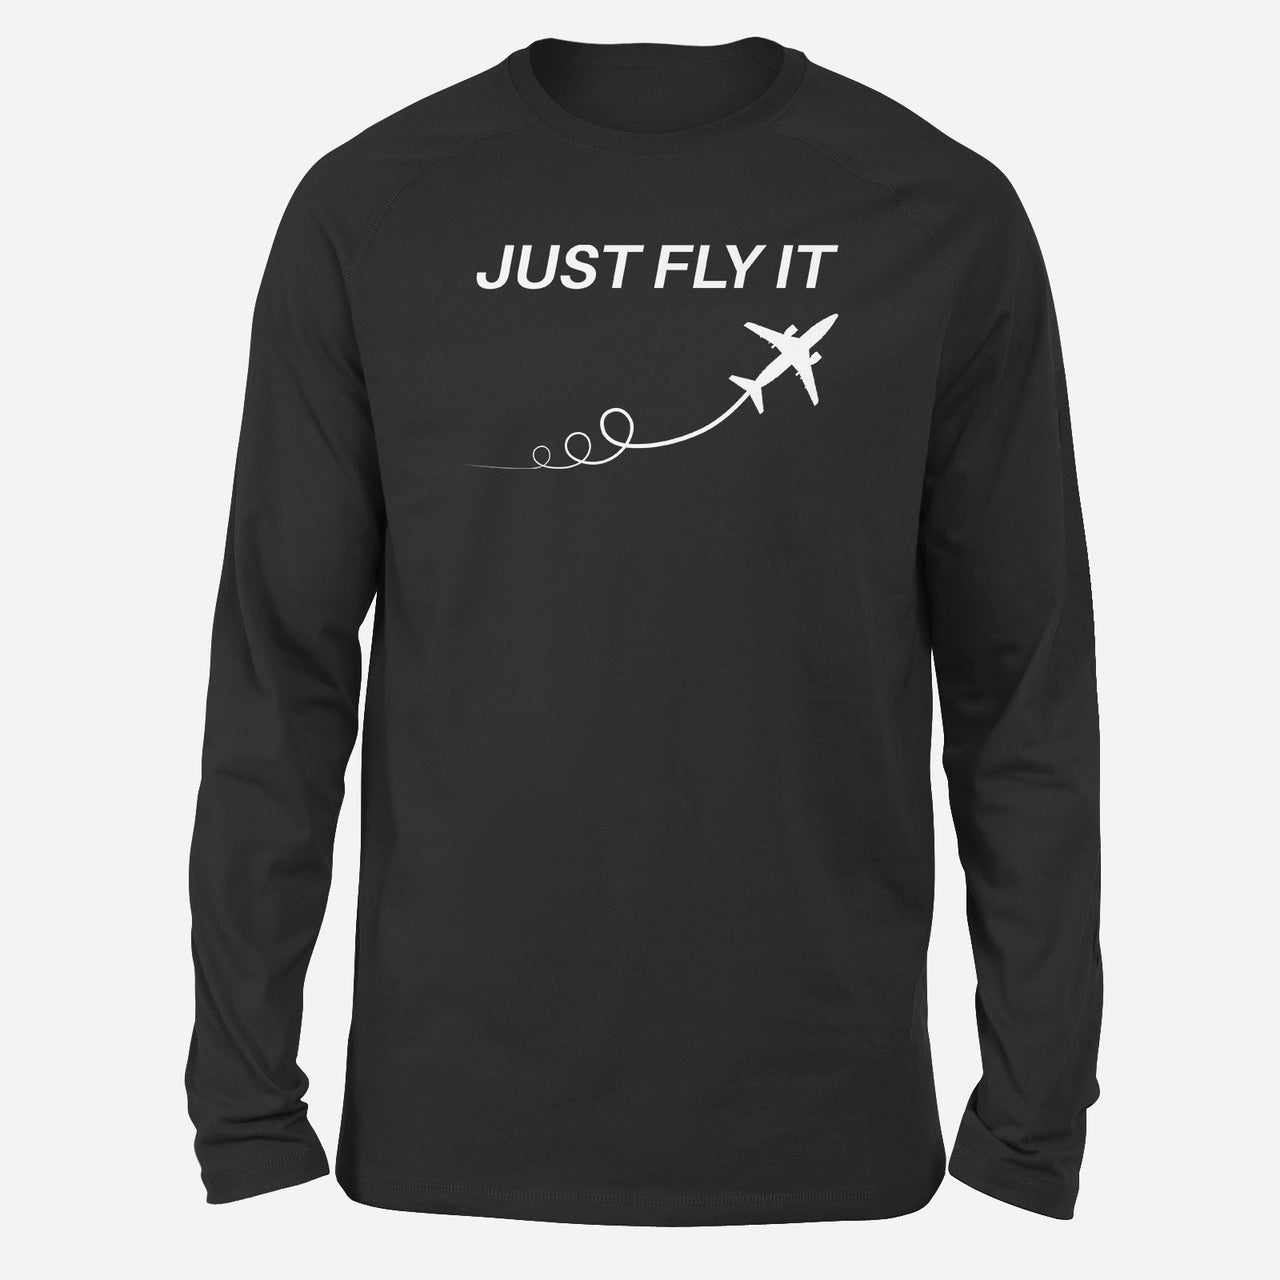 Just Fly It Designed Long-Sleeve T-Shirts